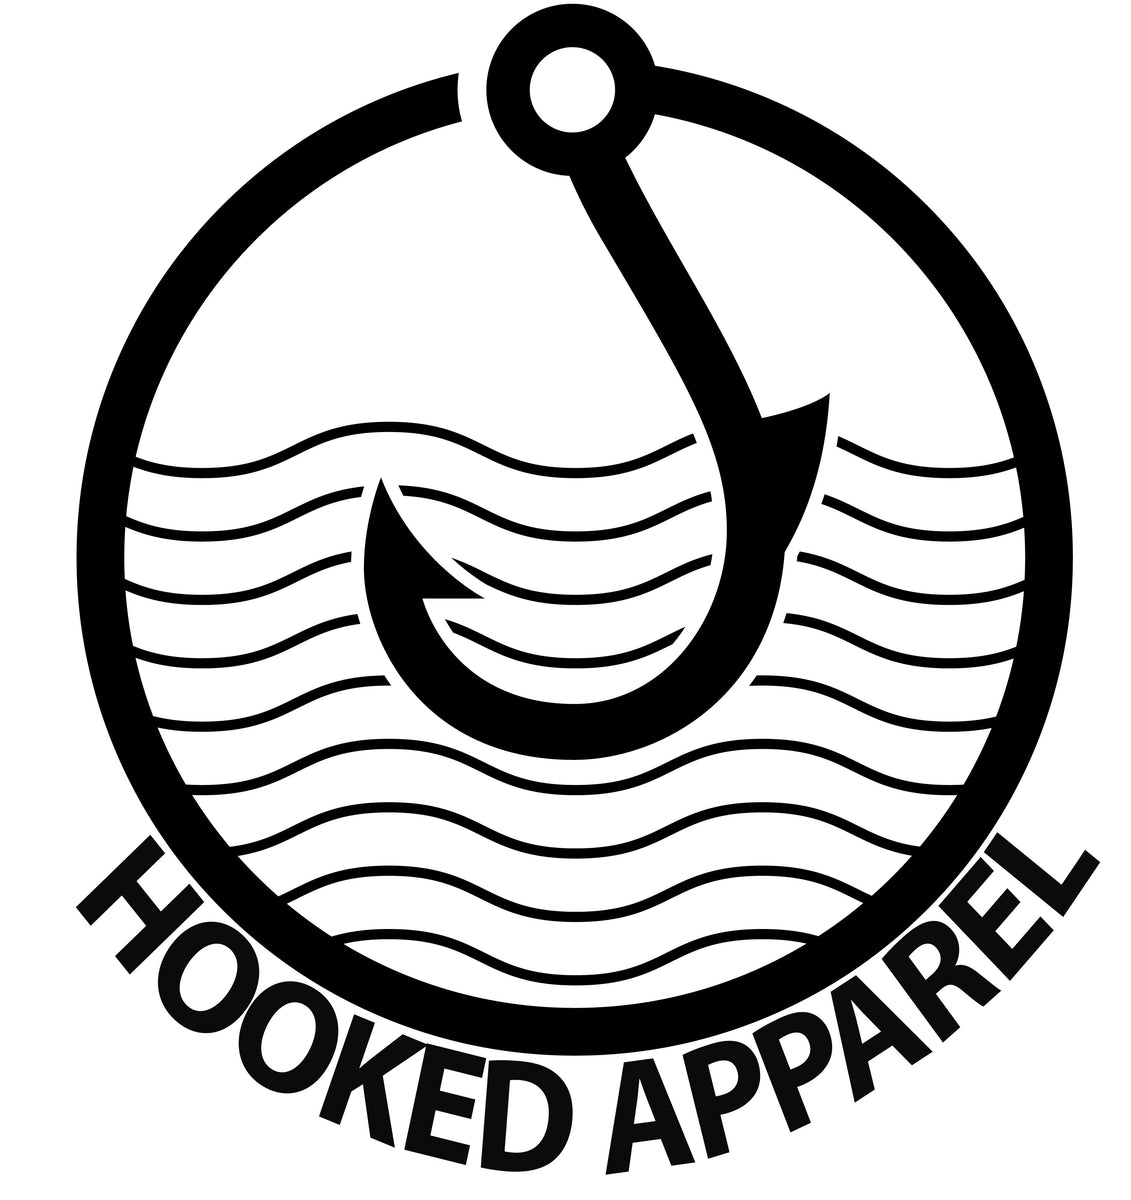 Logo for fishing apparel company By Outfishingapparel